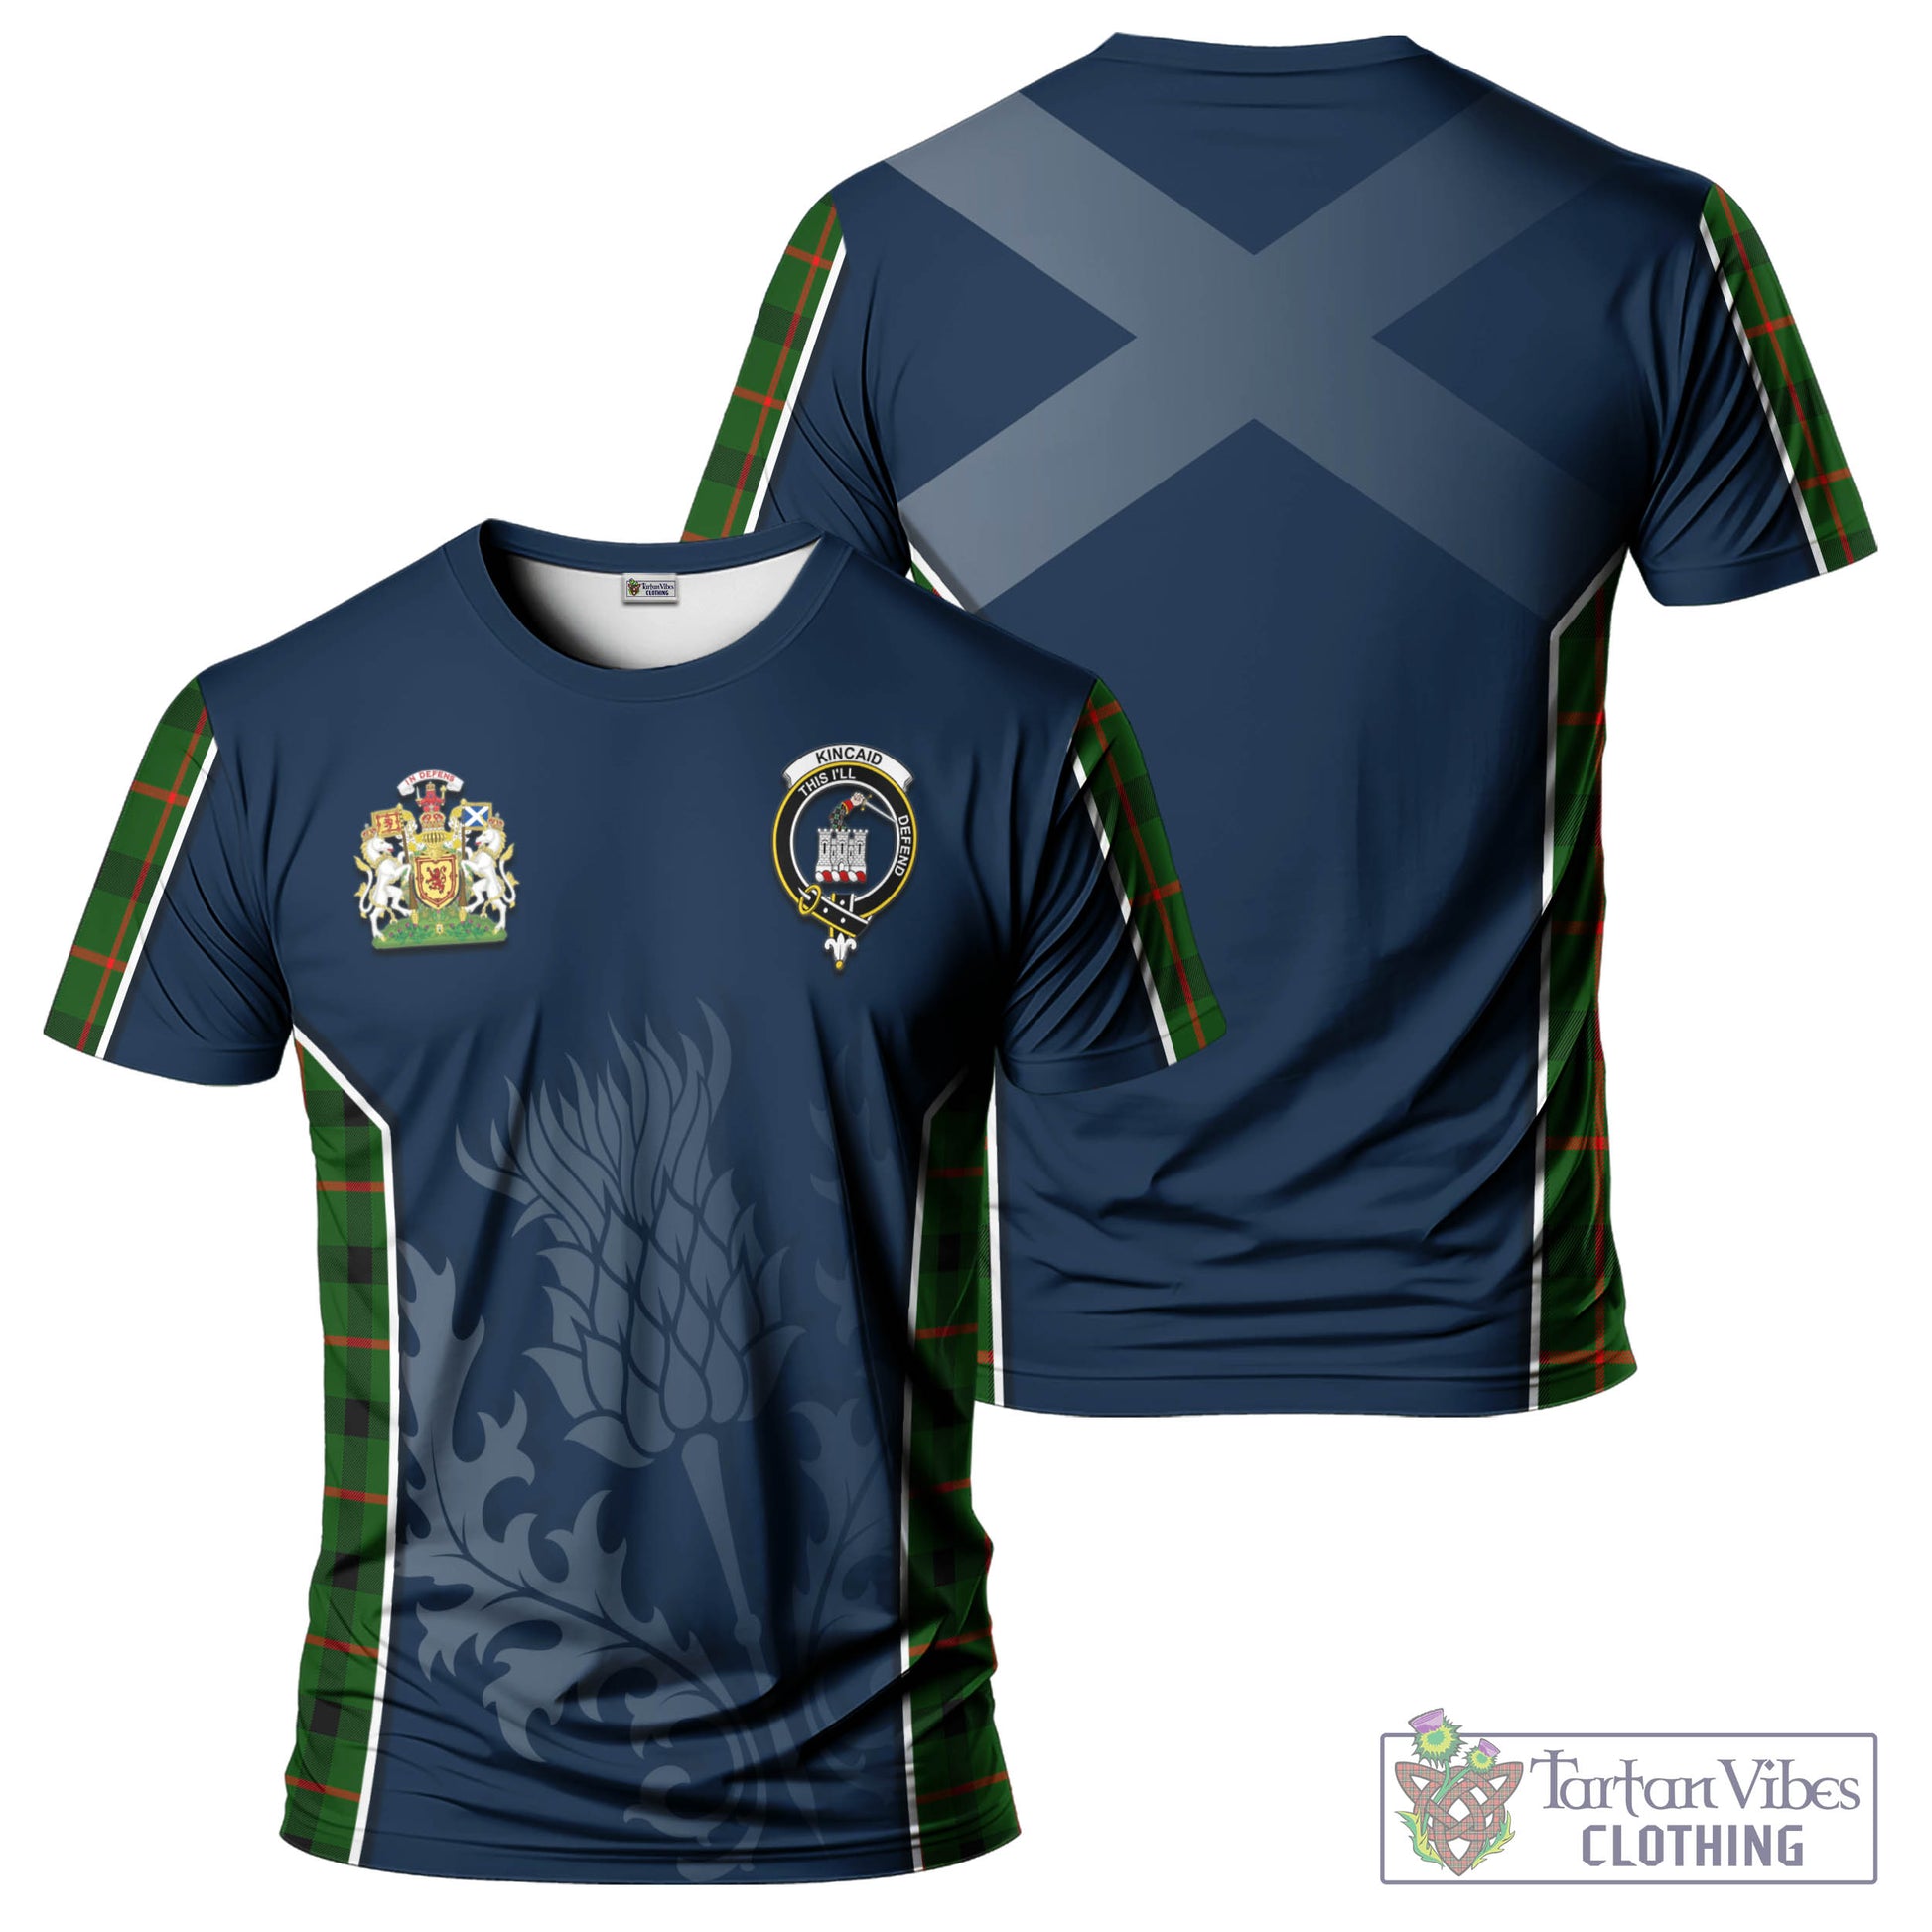 Tartan Vibes Clothing Kincaid Modern Tartan T-Shirt with Family Crest and Scottish Thistle Vibes Sport Style